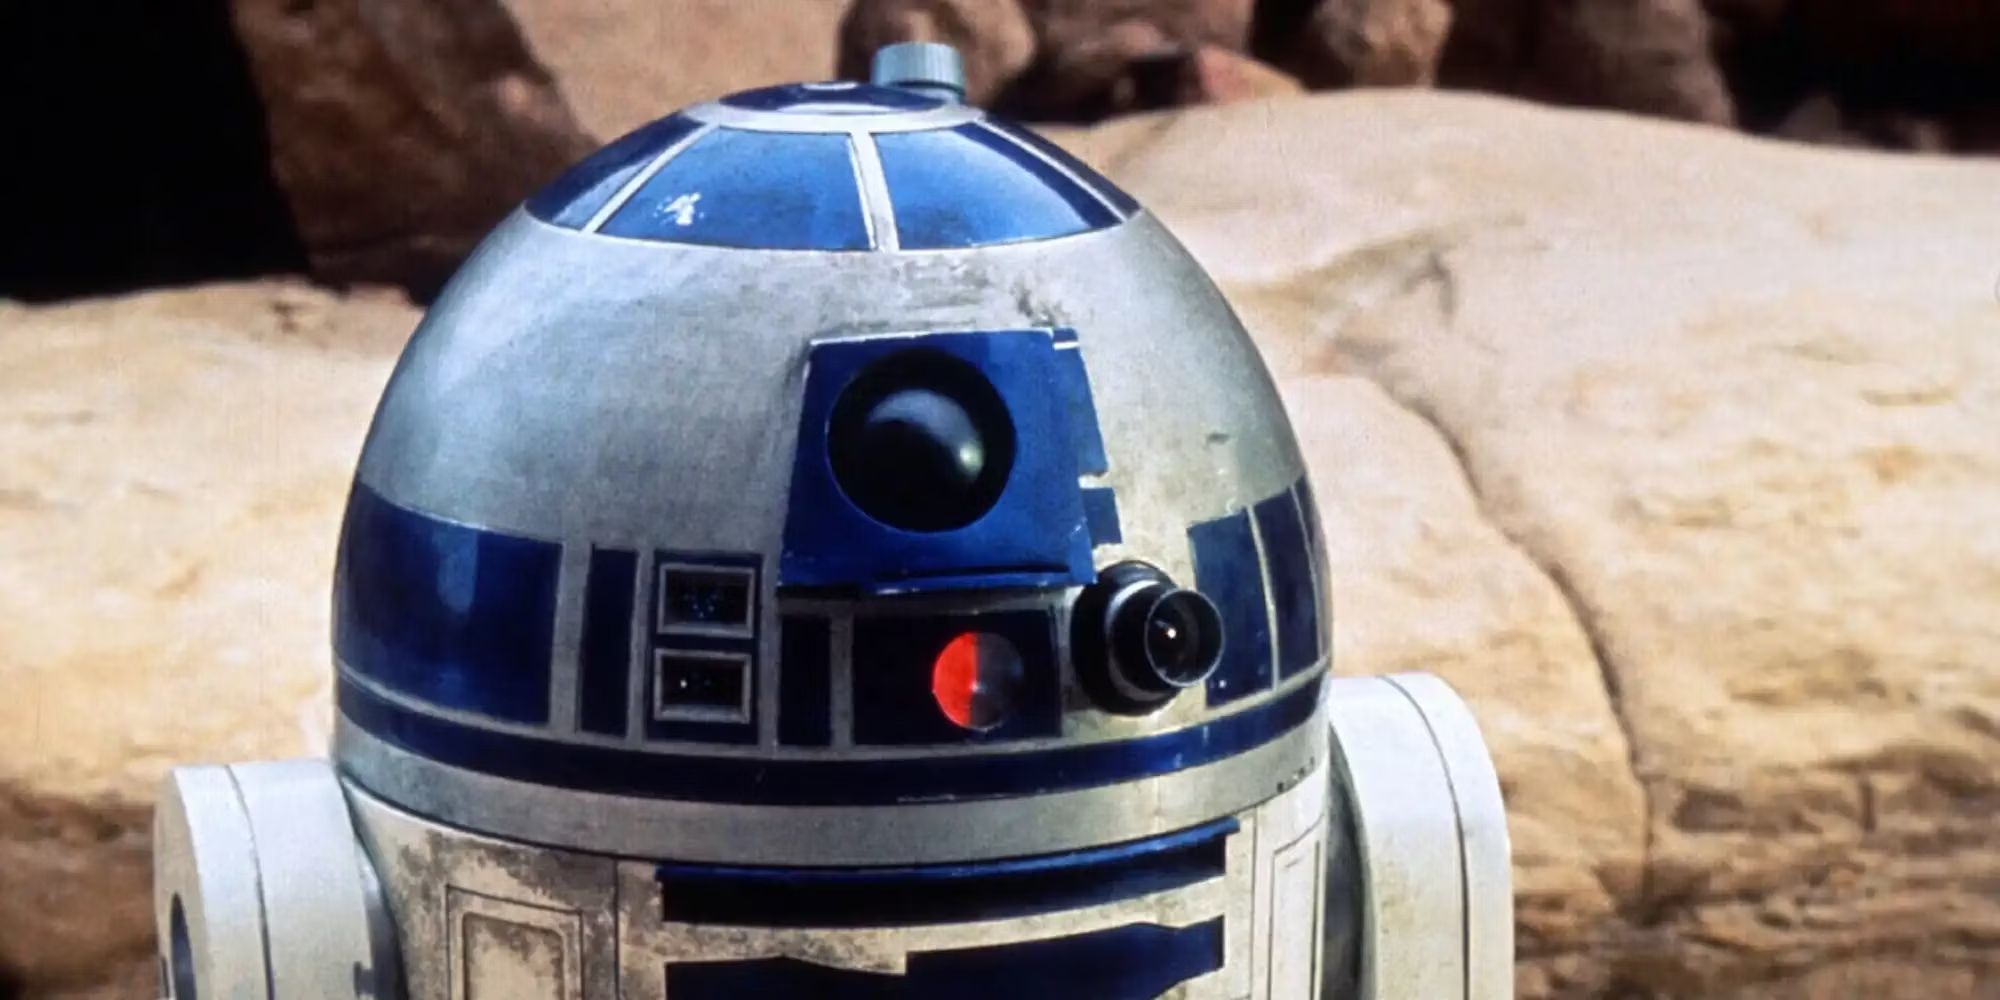 R2-D2 stands in the desert of Tatooine in Star Wars: A New Hope